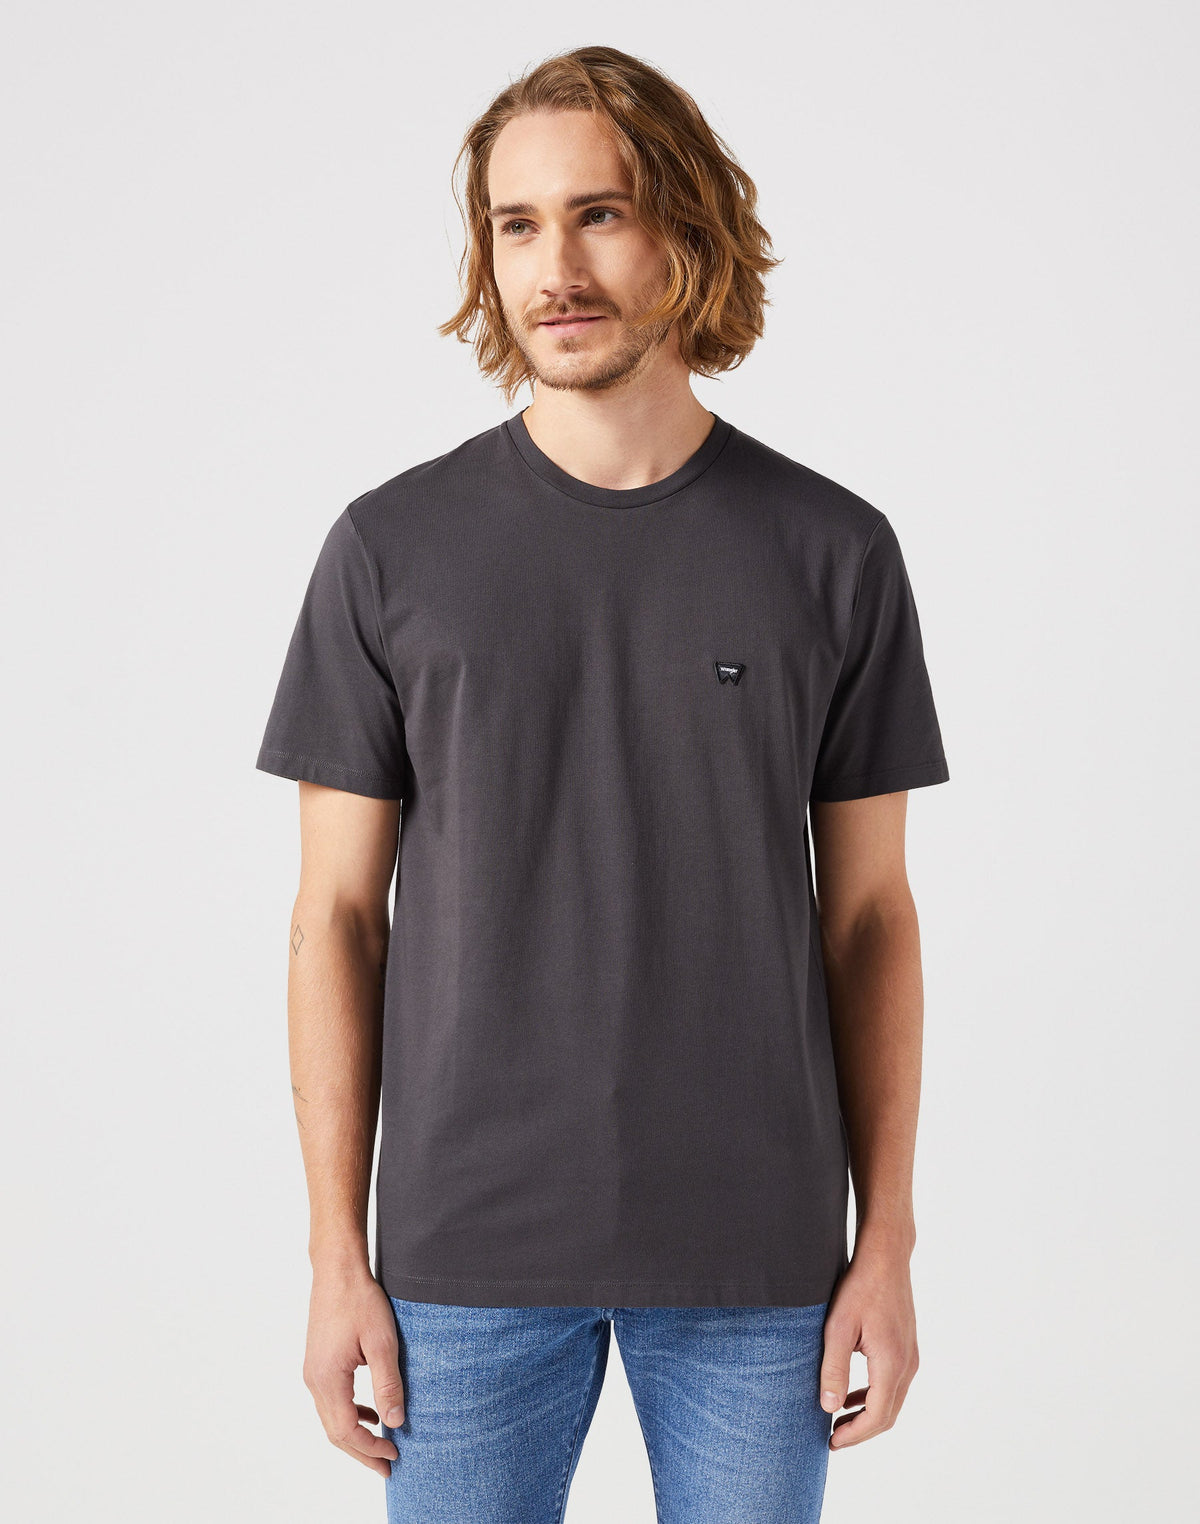 Sign Off Tee in Faded Black